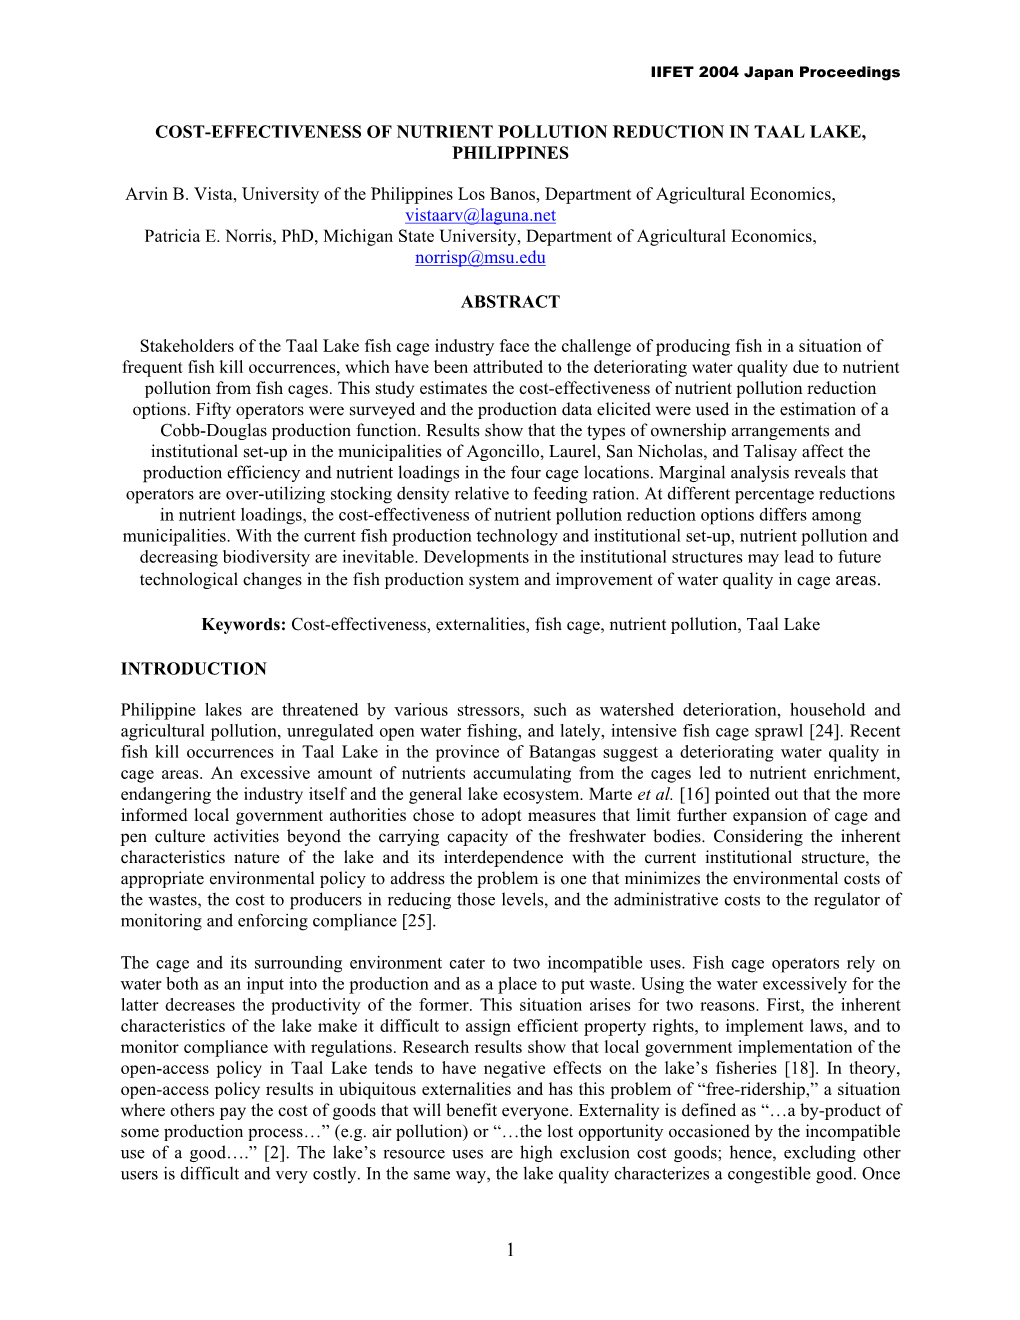 Cost-Effectiveness of Nutrient Pollution Reduction in Taal Lake, Philippines